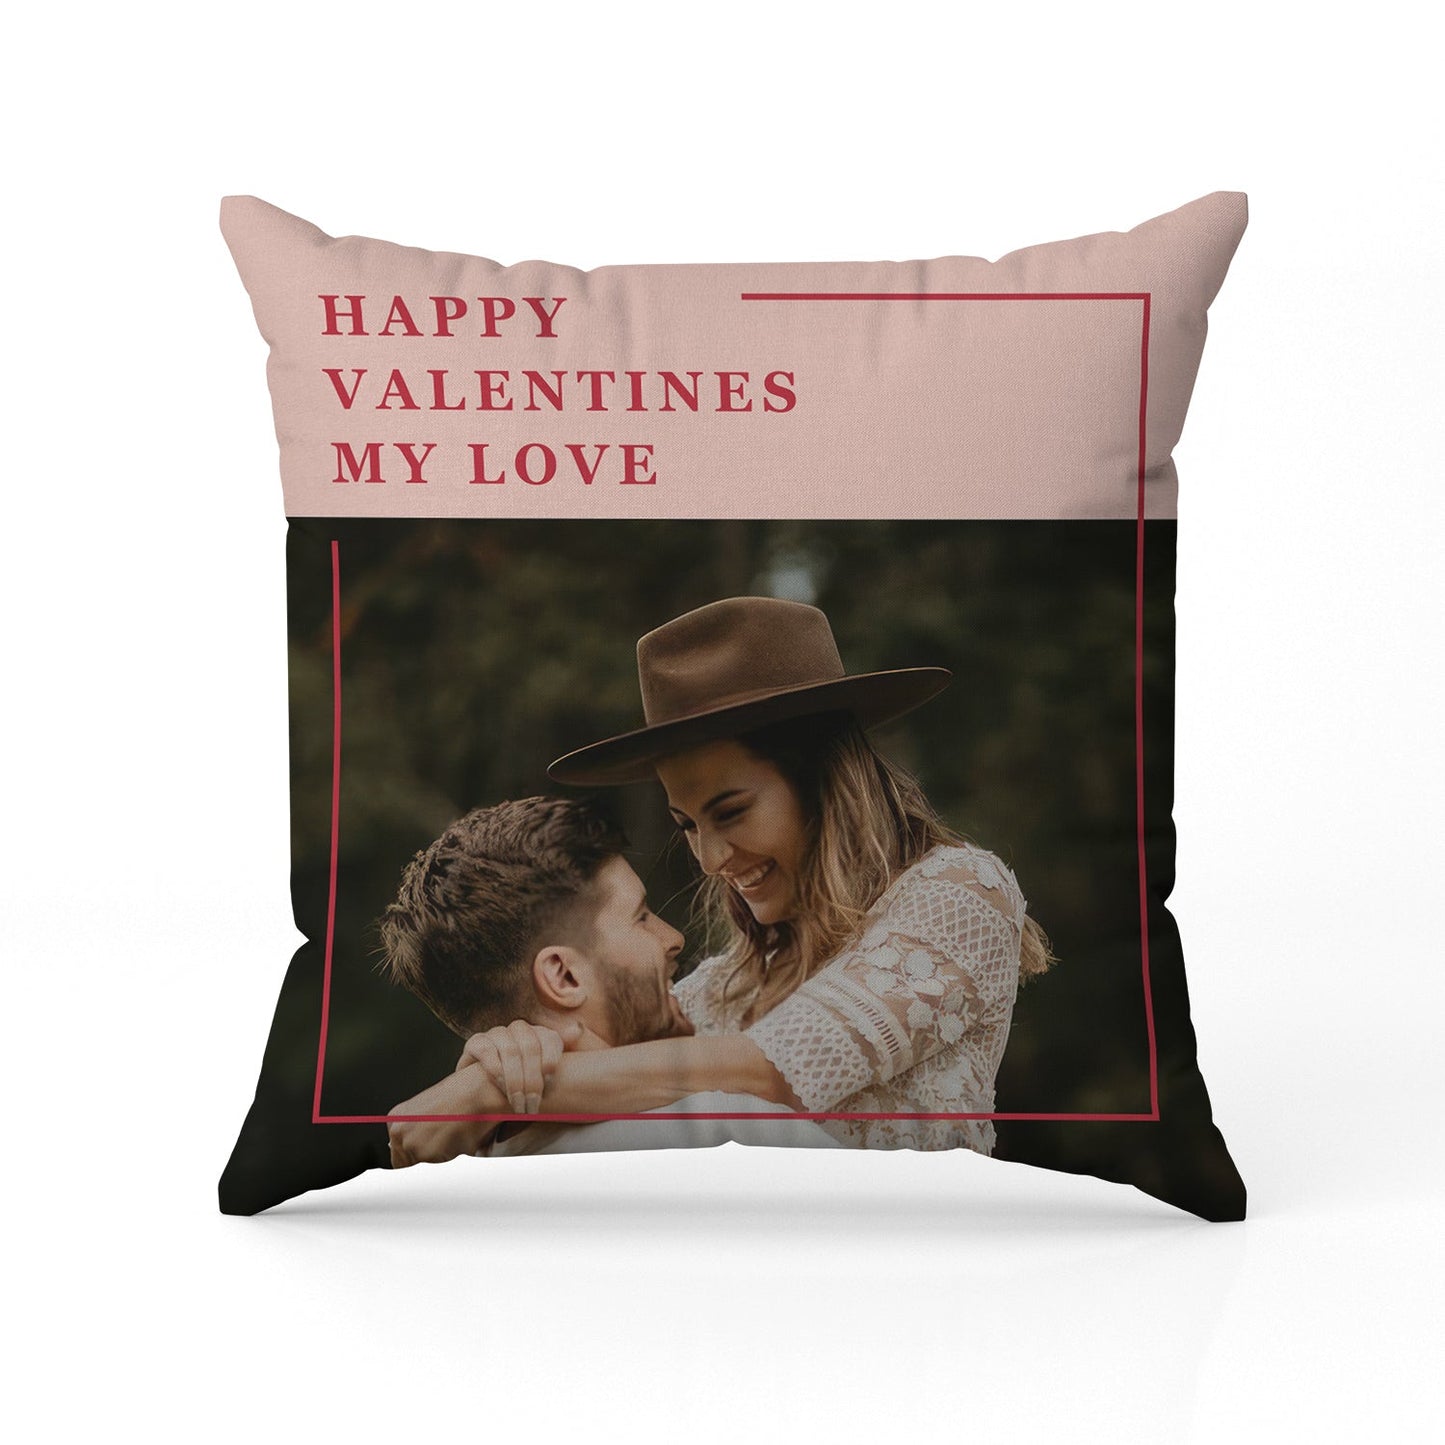 Happy Valentine's Day - Personalized Valentine's Day gift For Him or Her - Custom Pillow - MyMindfulGifts